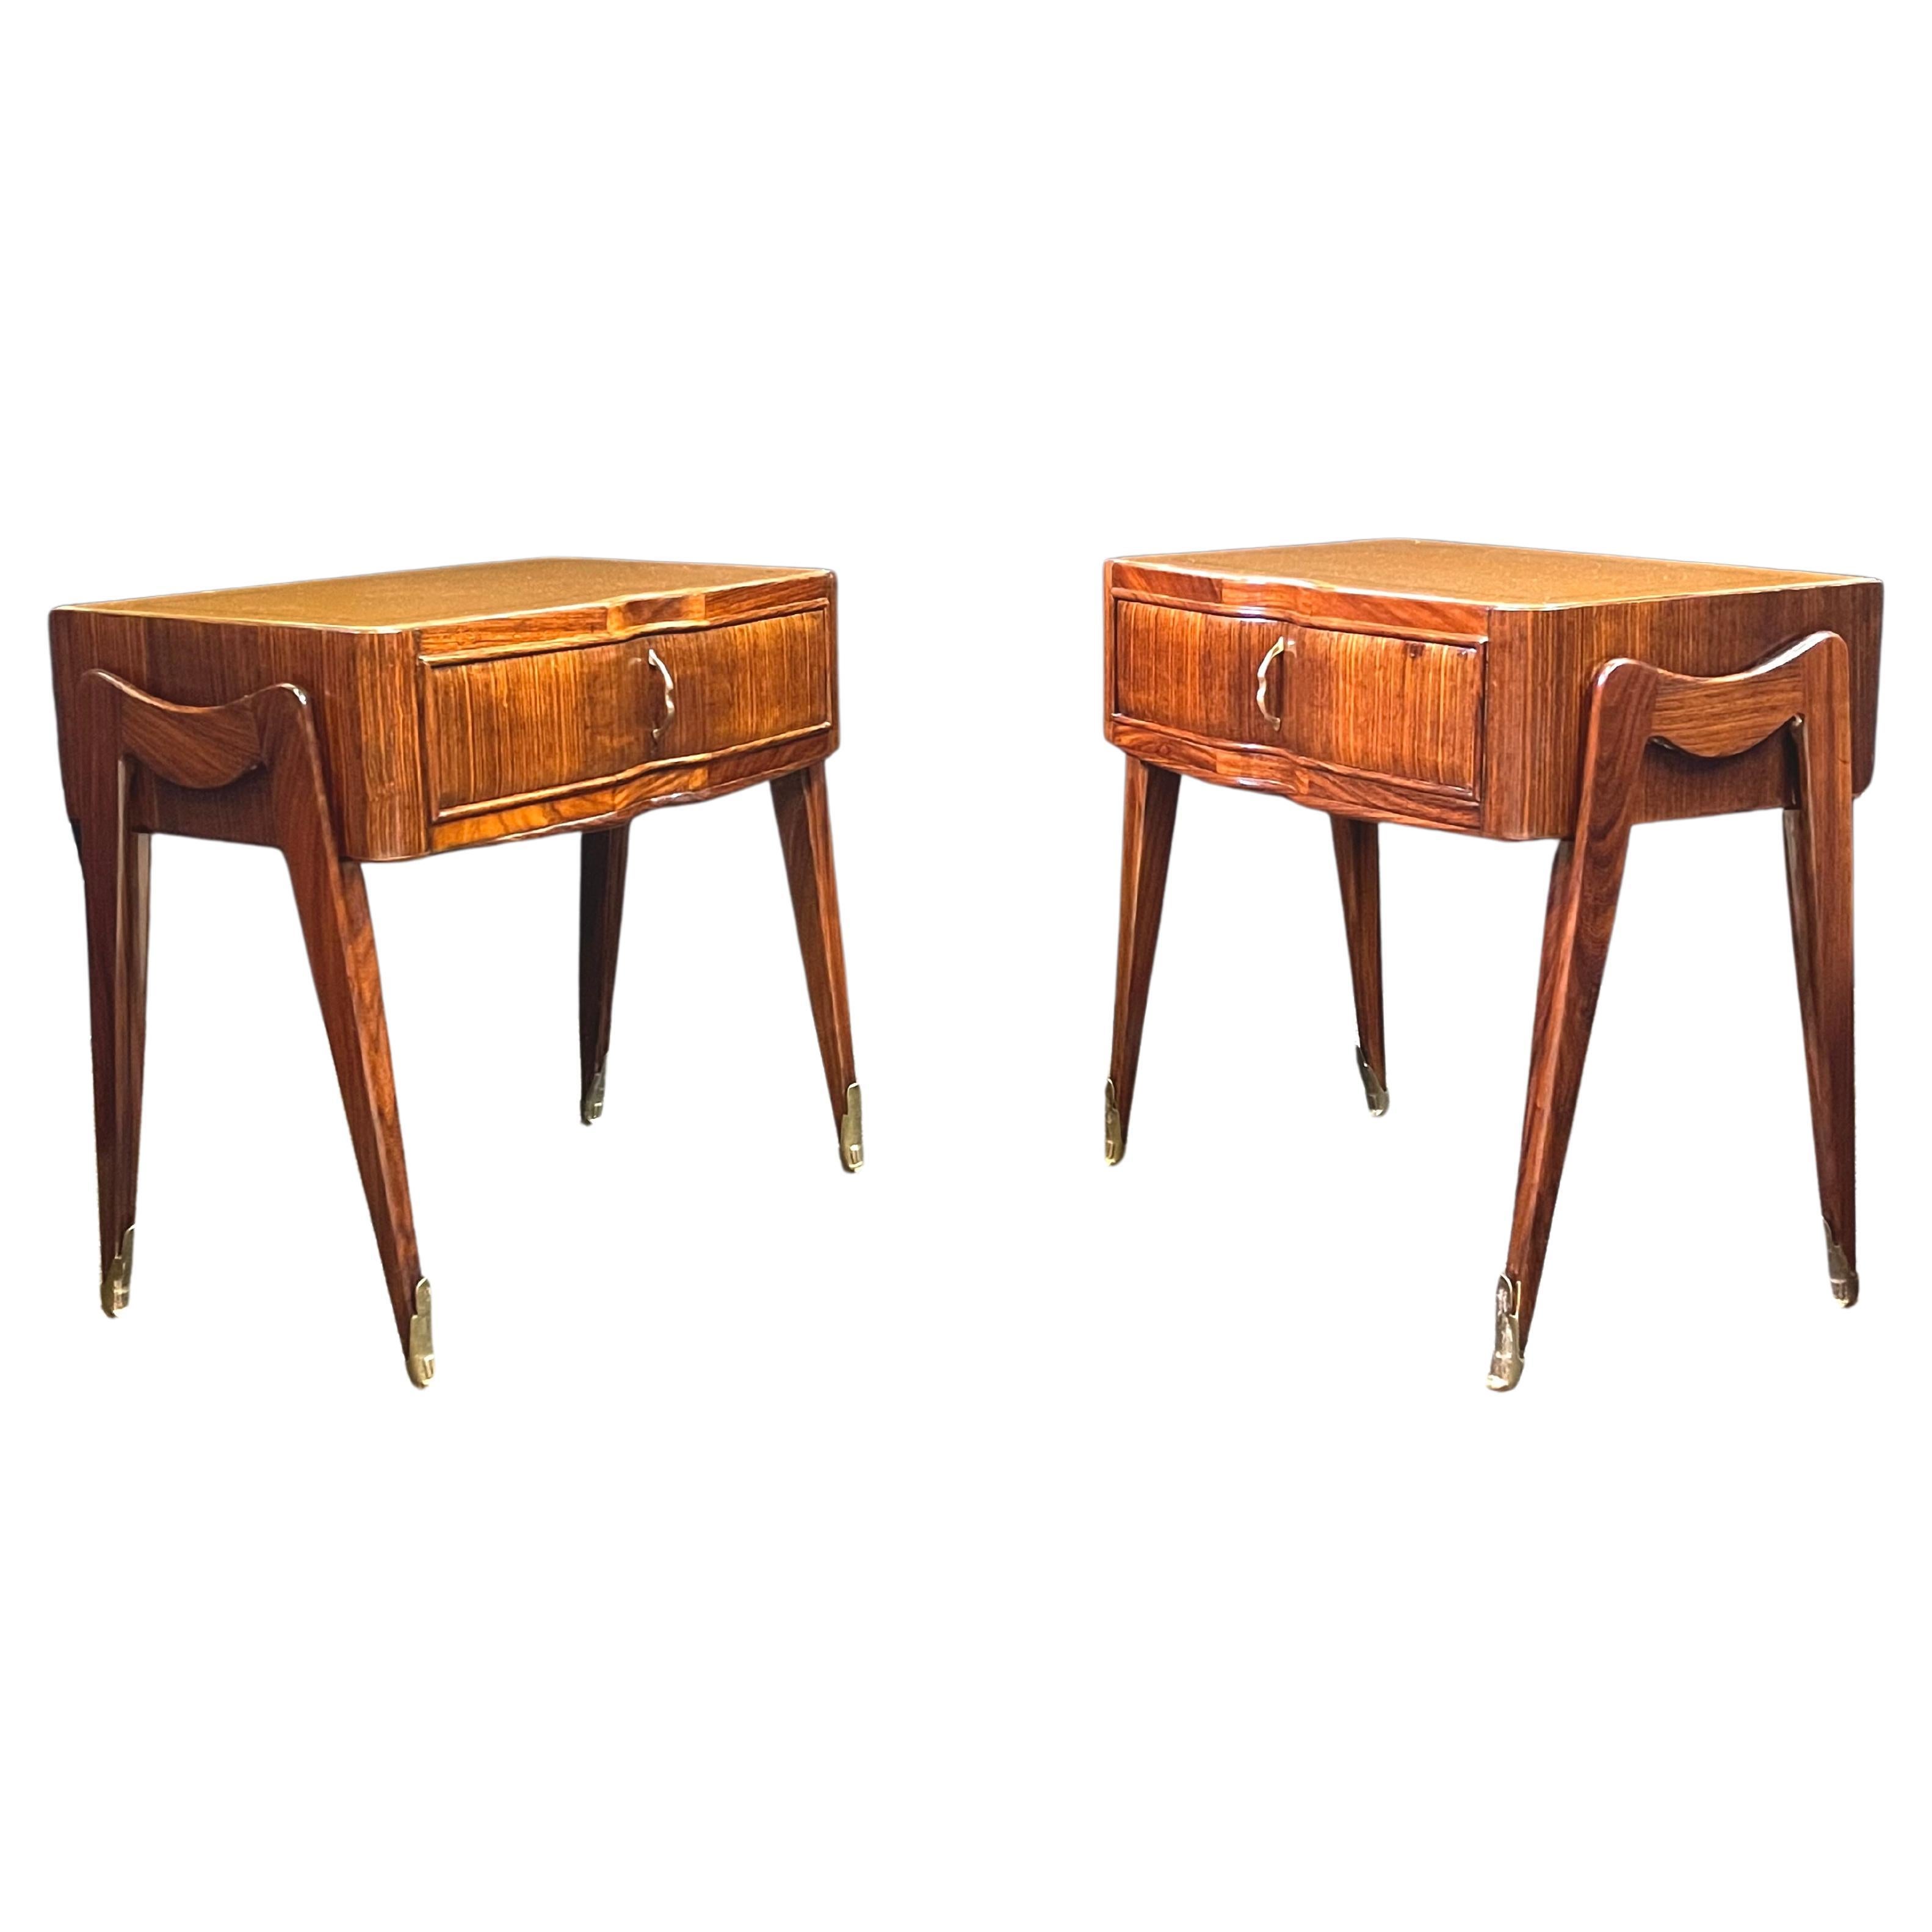 Italian Midcentury Modern Bedside Tables by Vittorio Dassi